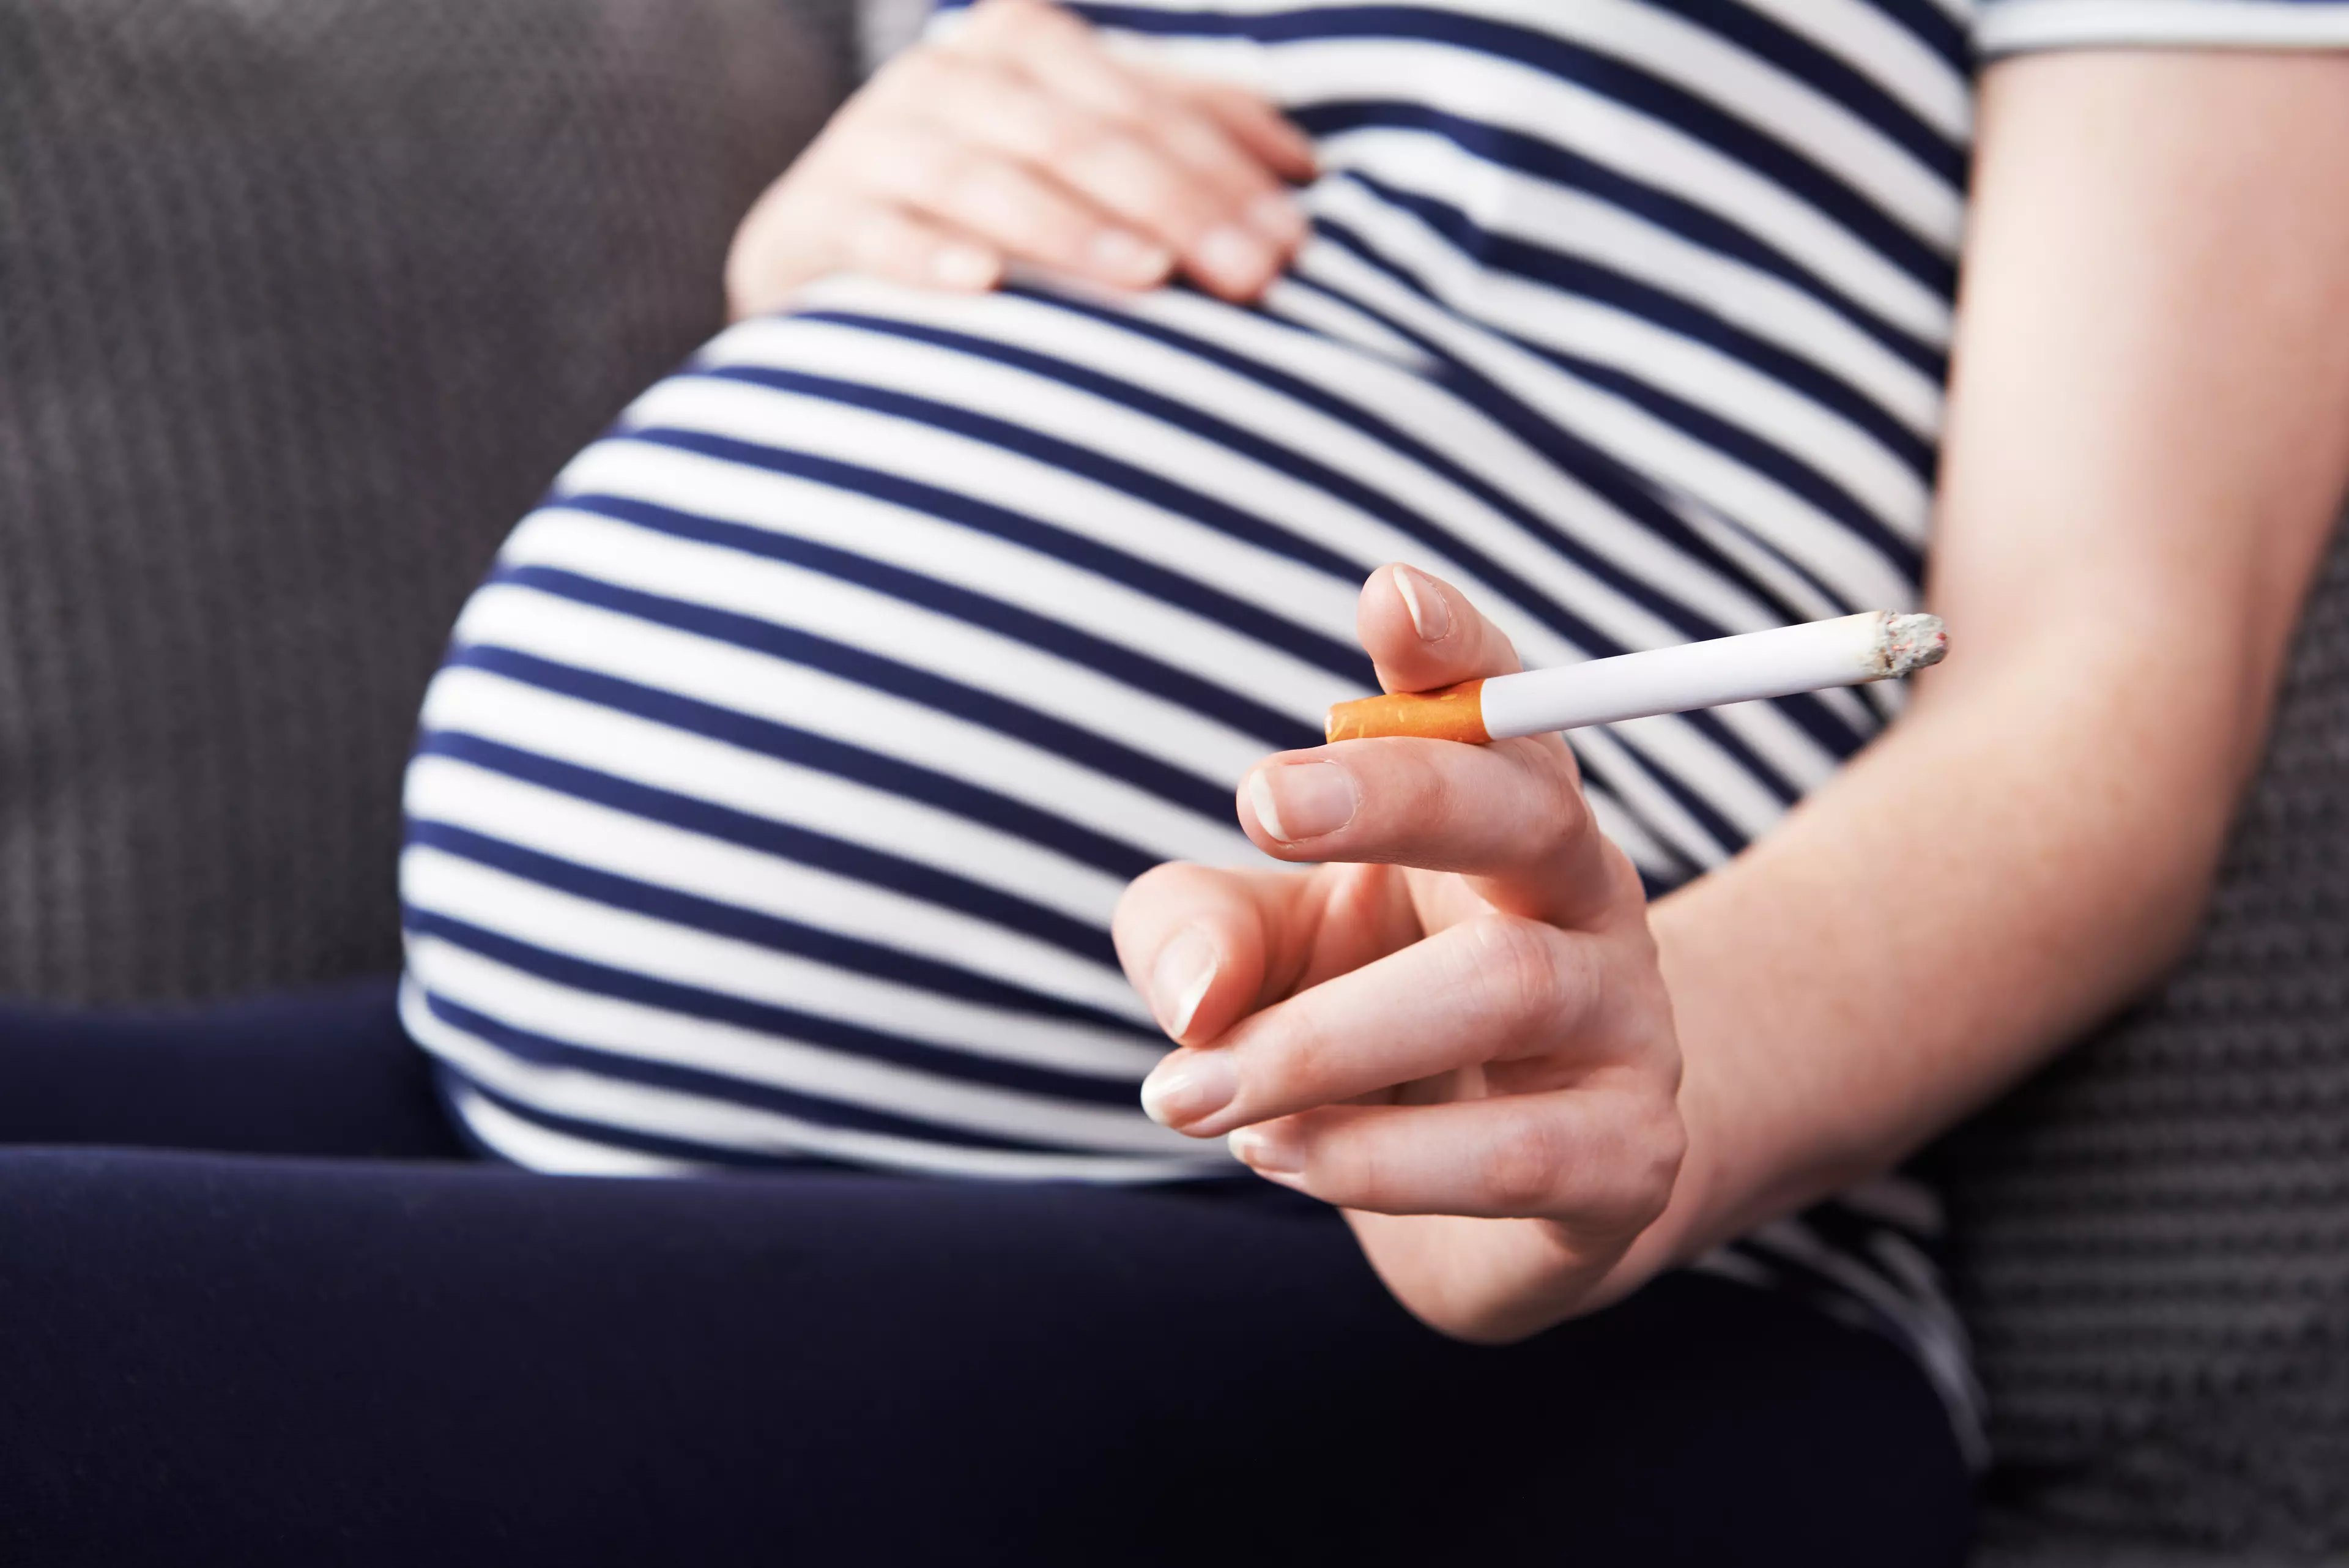 Pregnant women could be given vouchers to quit smoking (